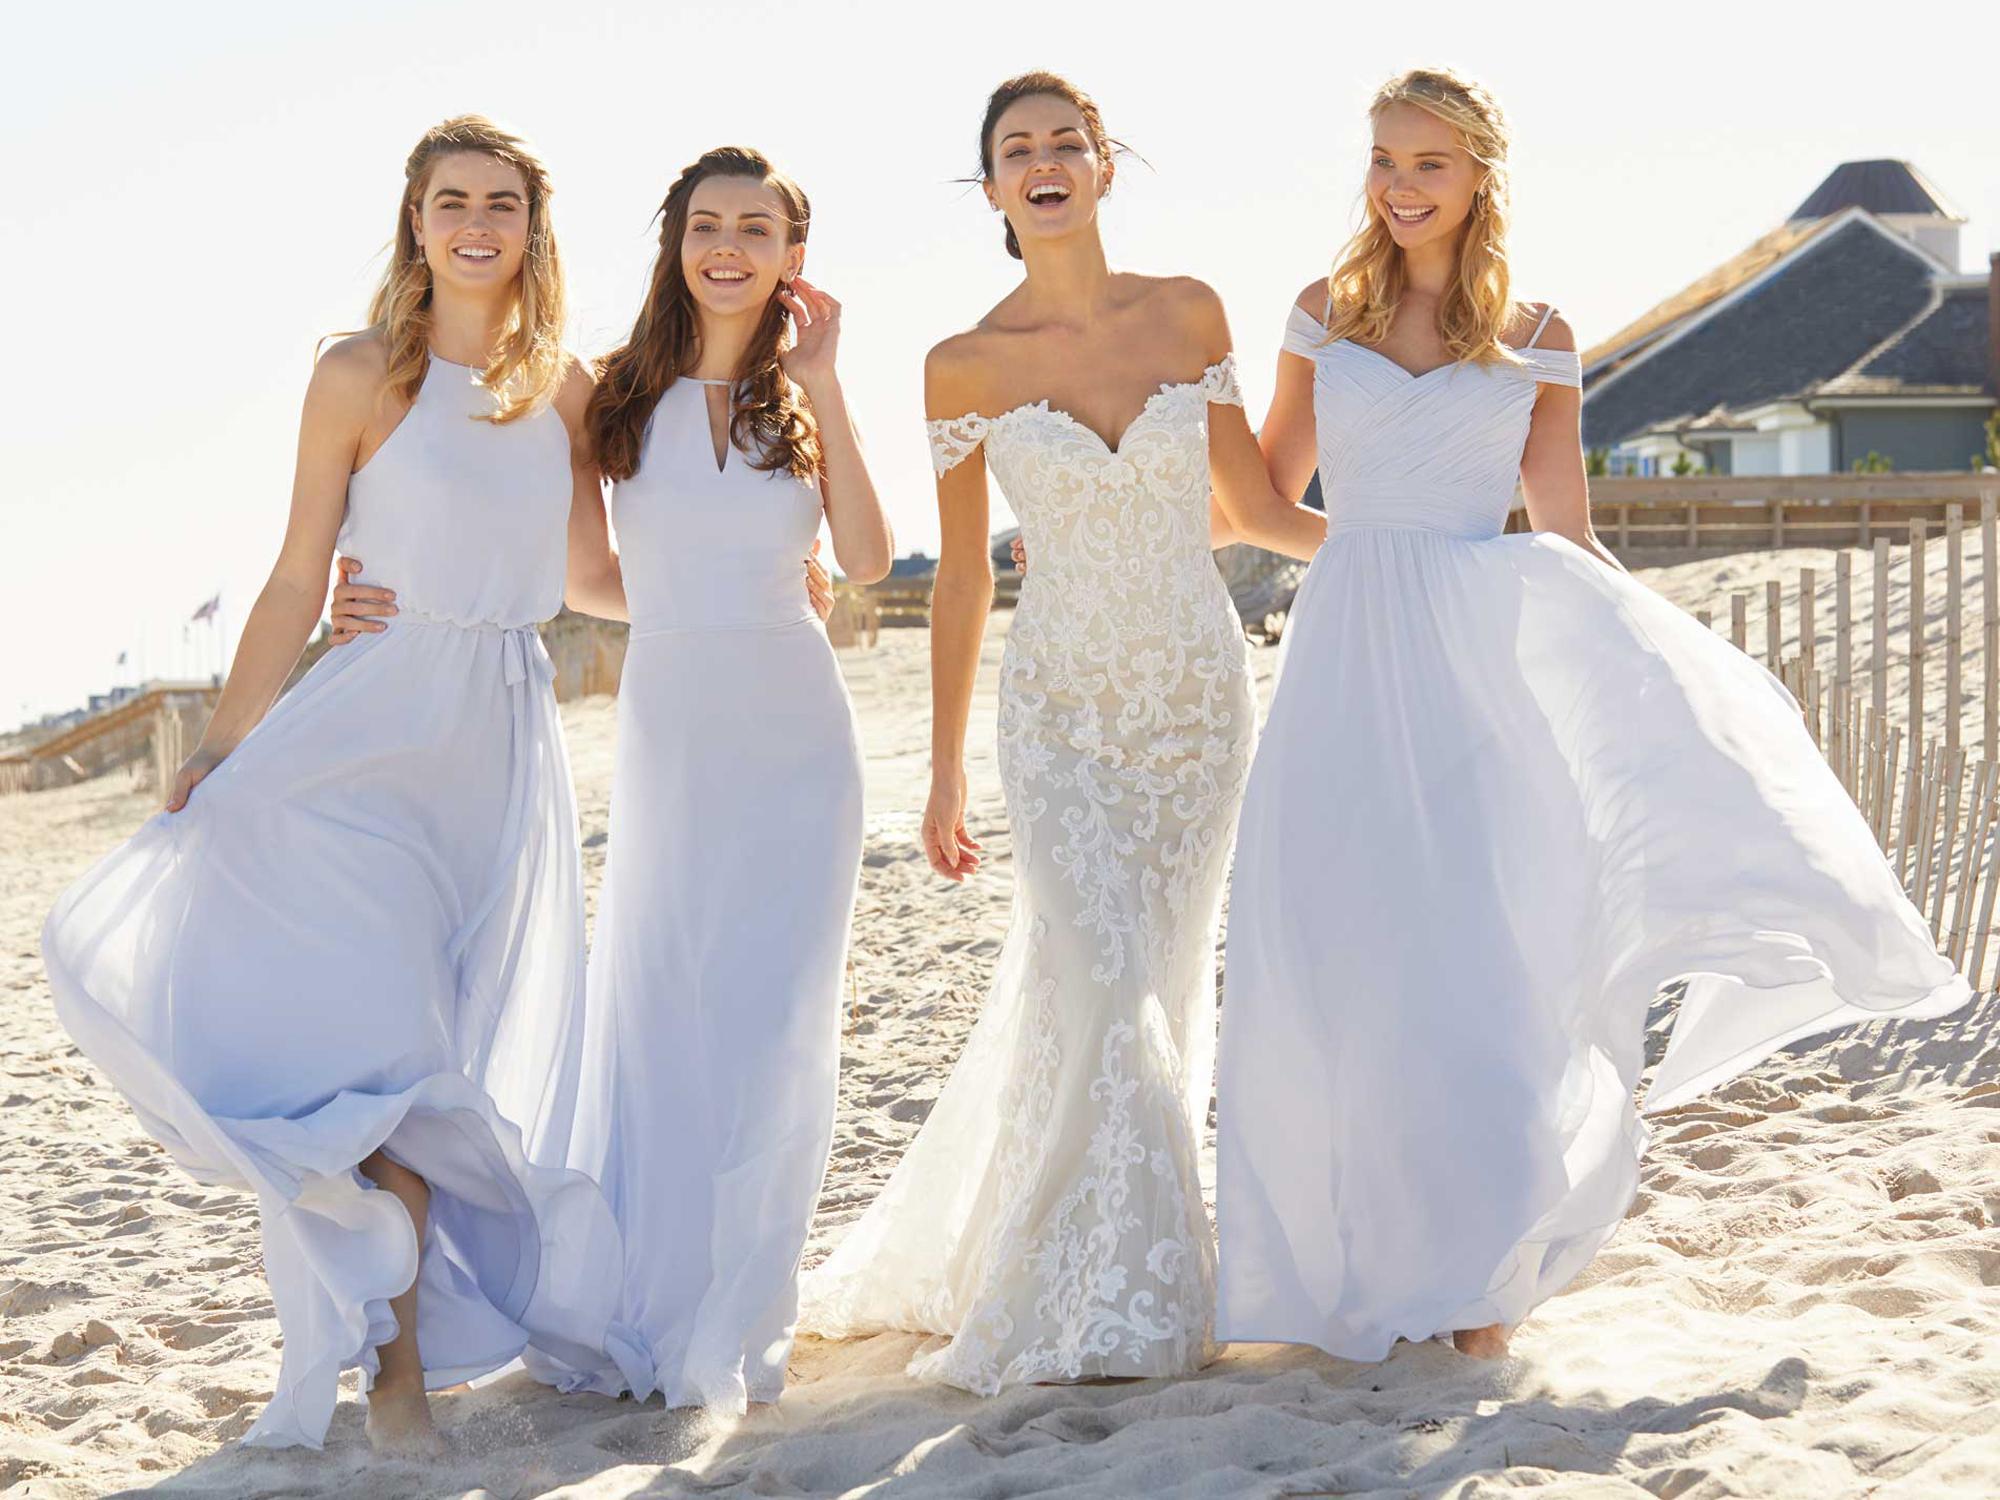 Great Beach Bridesmaid Dresses For Weddings  The ultimate guide 